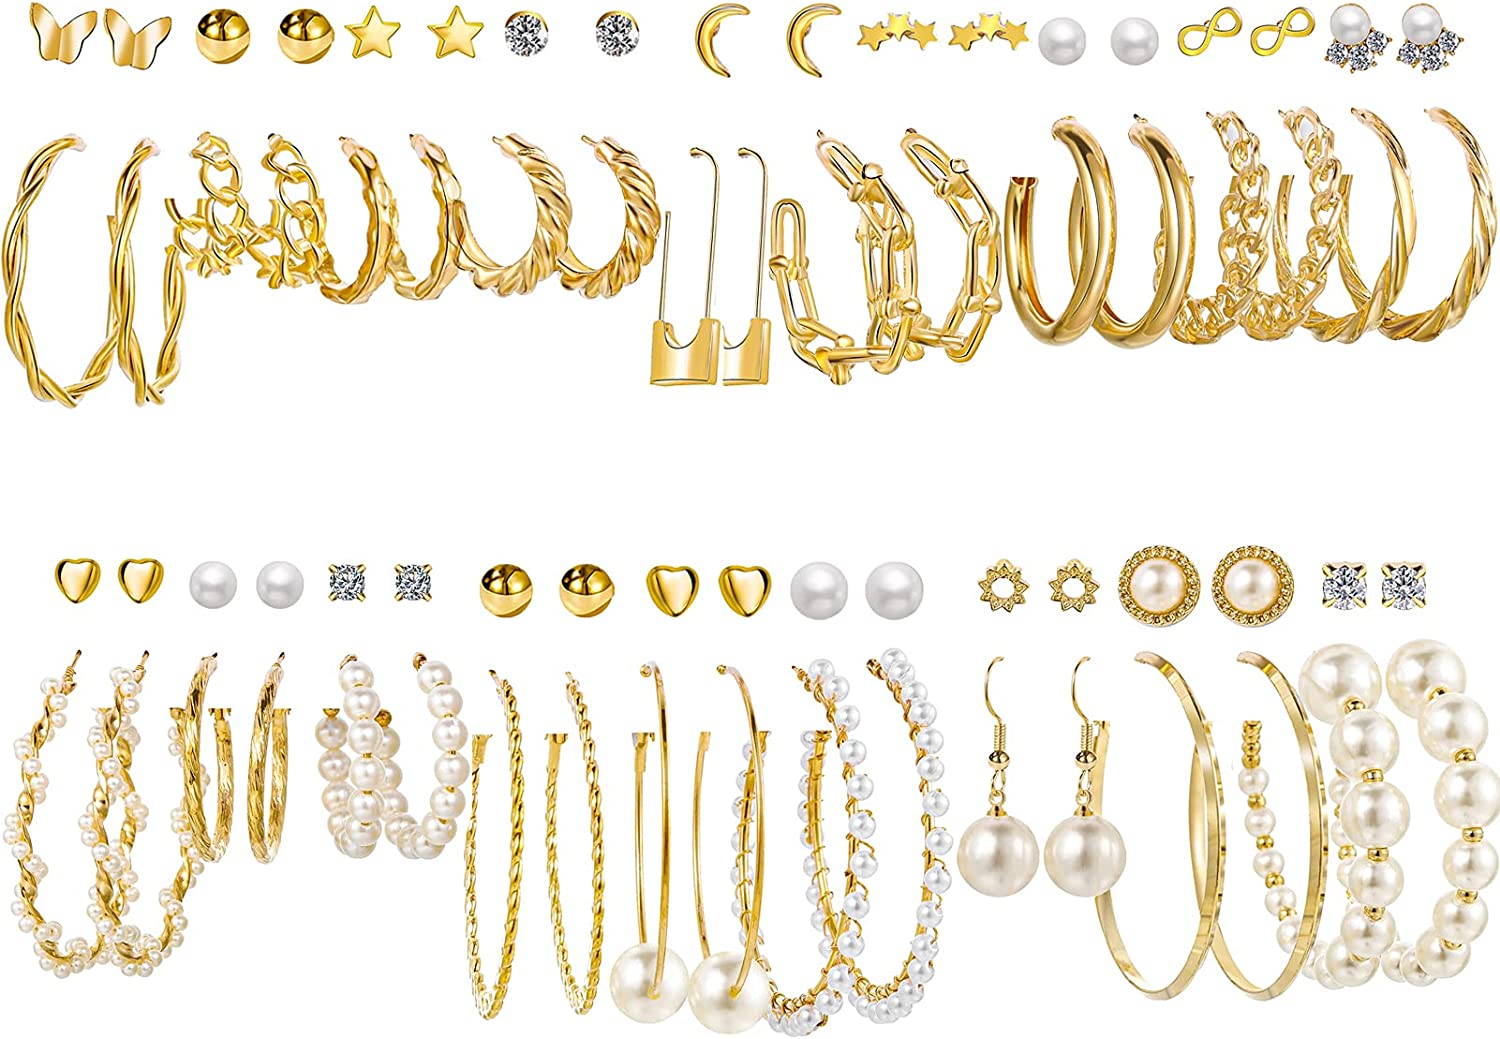 36 Pairs Gold Pearl Earrings Set for Women Girls, Fashion Chain Link Hoop Stud Drop Dangle Earrings Boho Statement Paperclip Hypoallergenic Earrings for Birthday Party Christmas Jewelry Gift